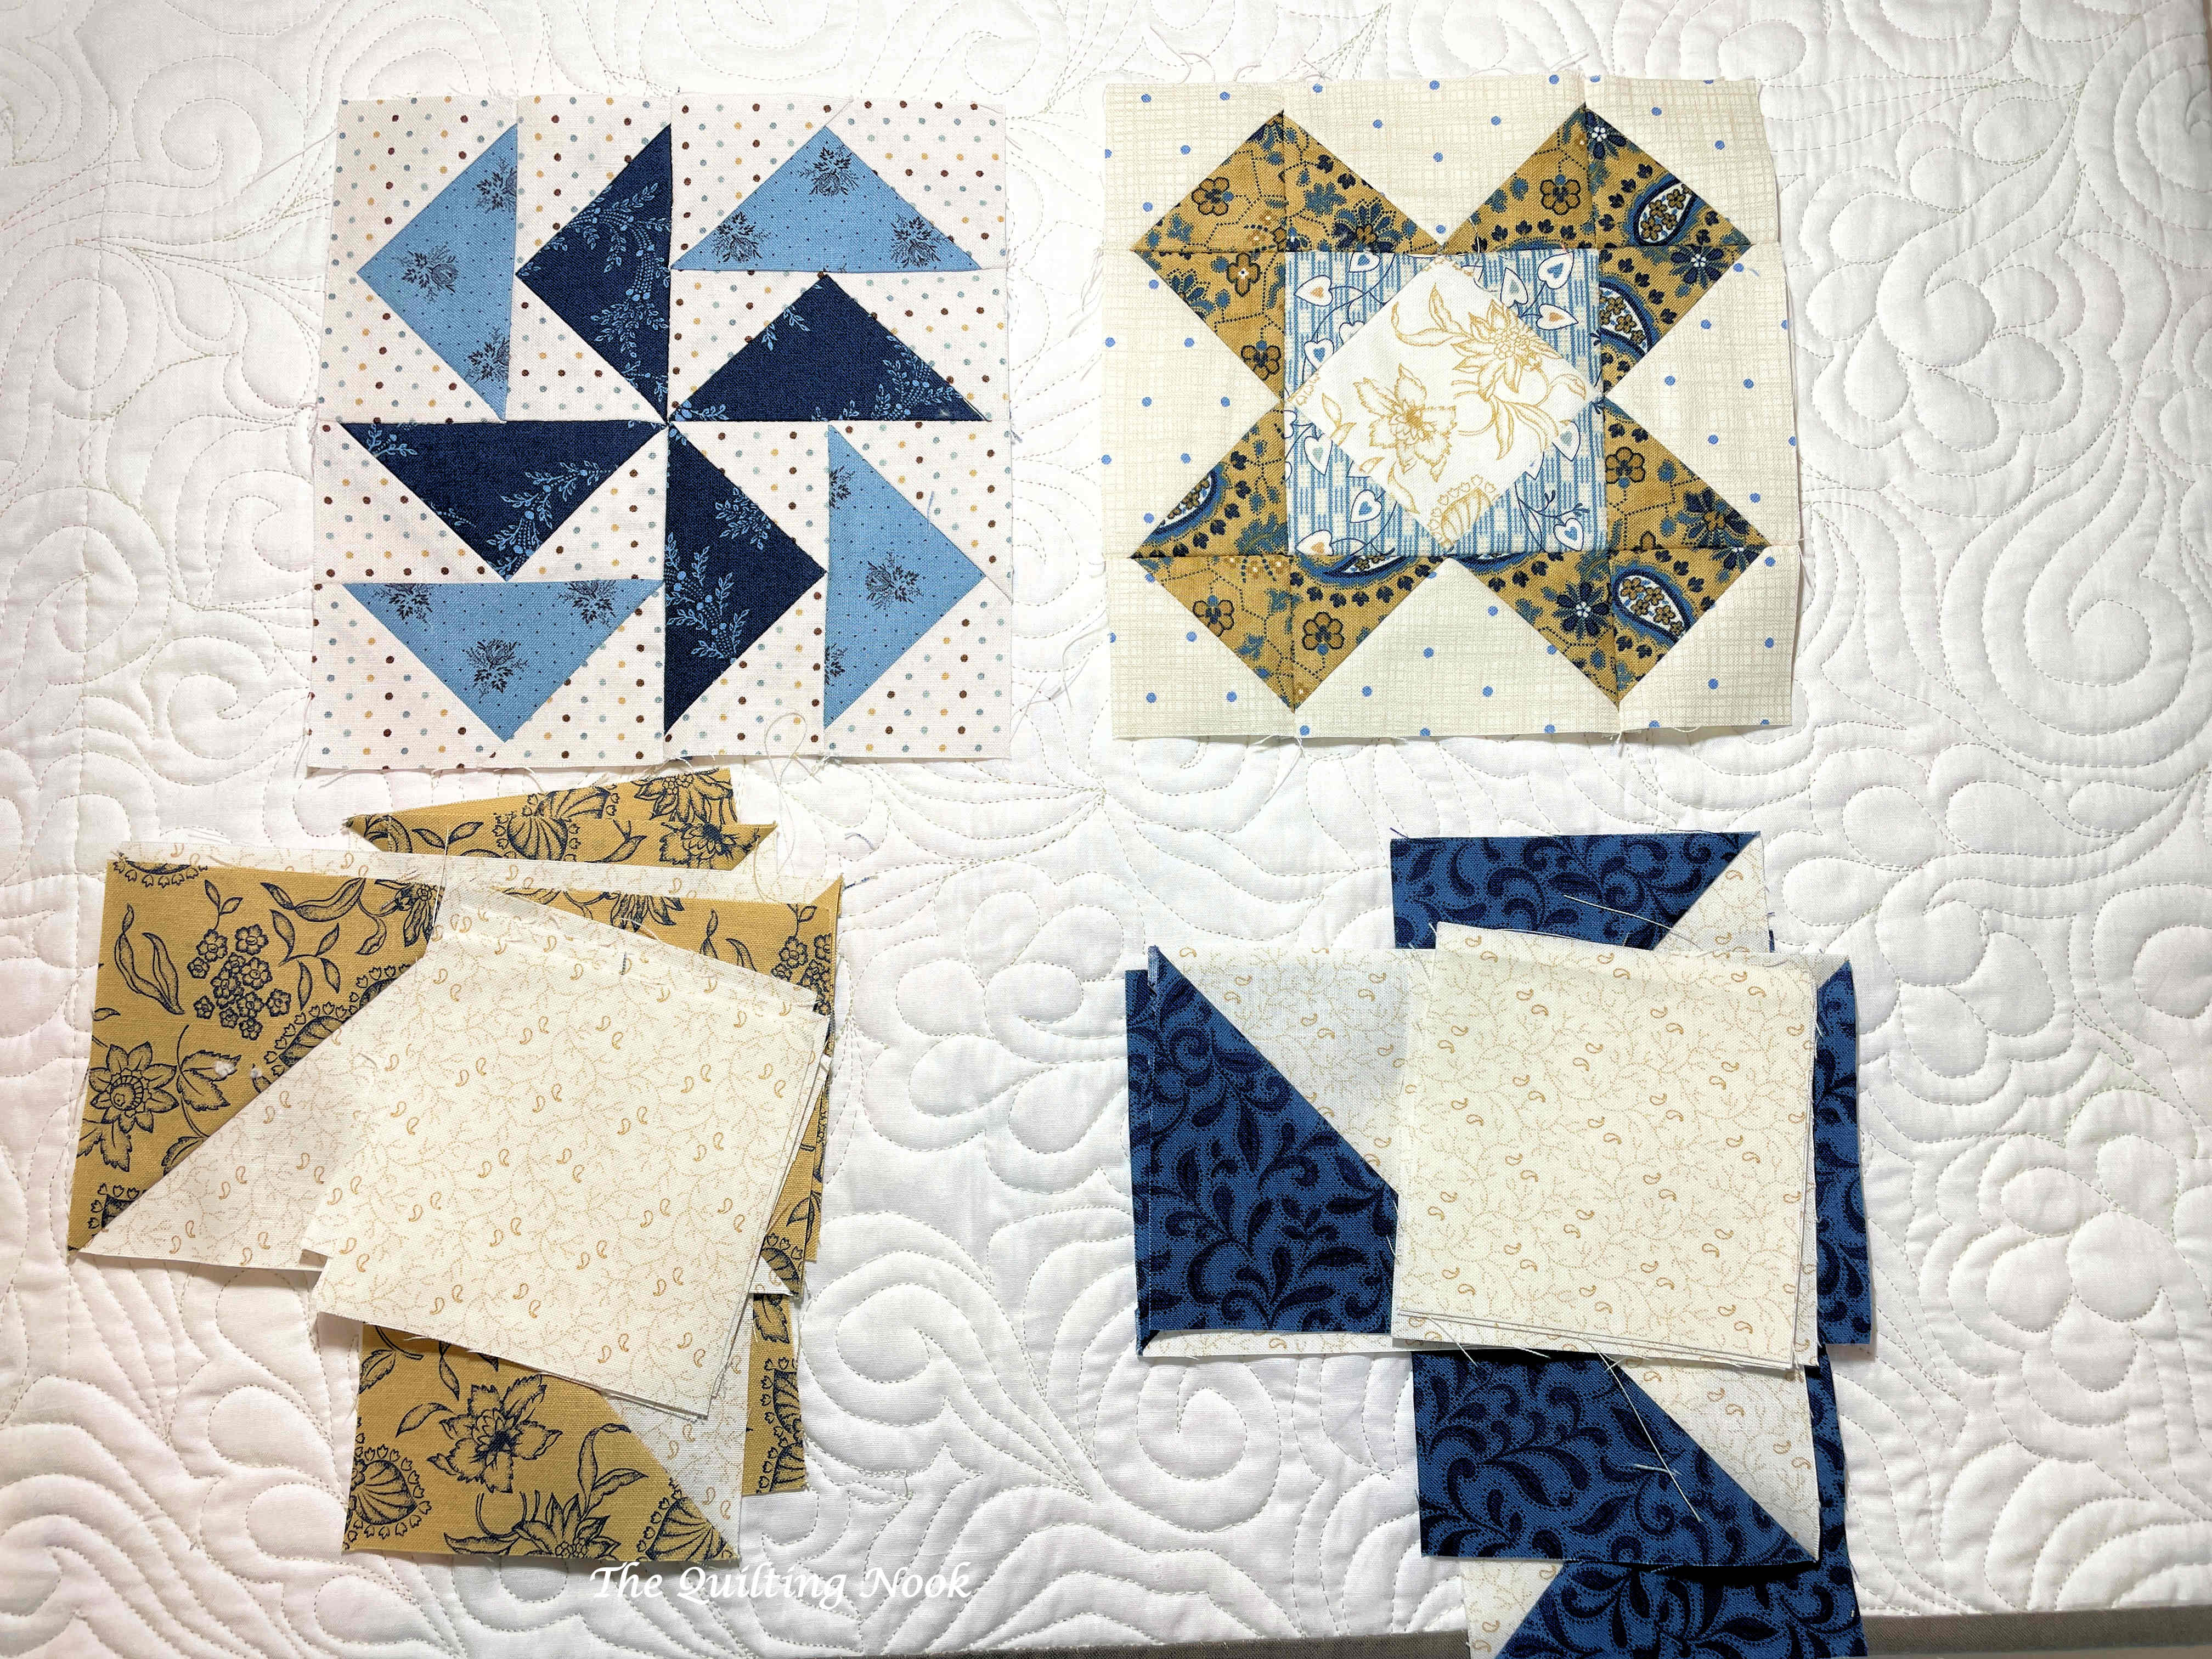 The Quilting Nook | Where I share my quilting and crafting journey